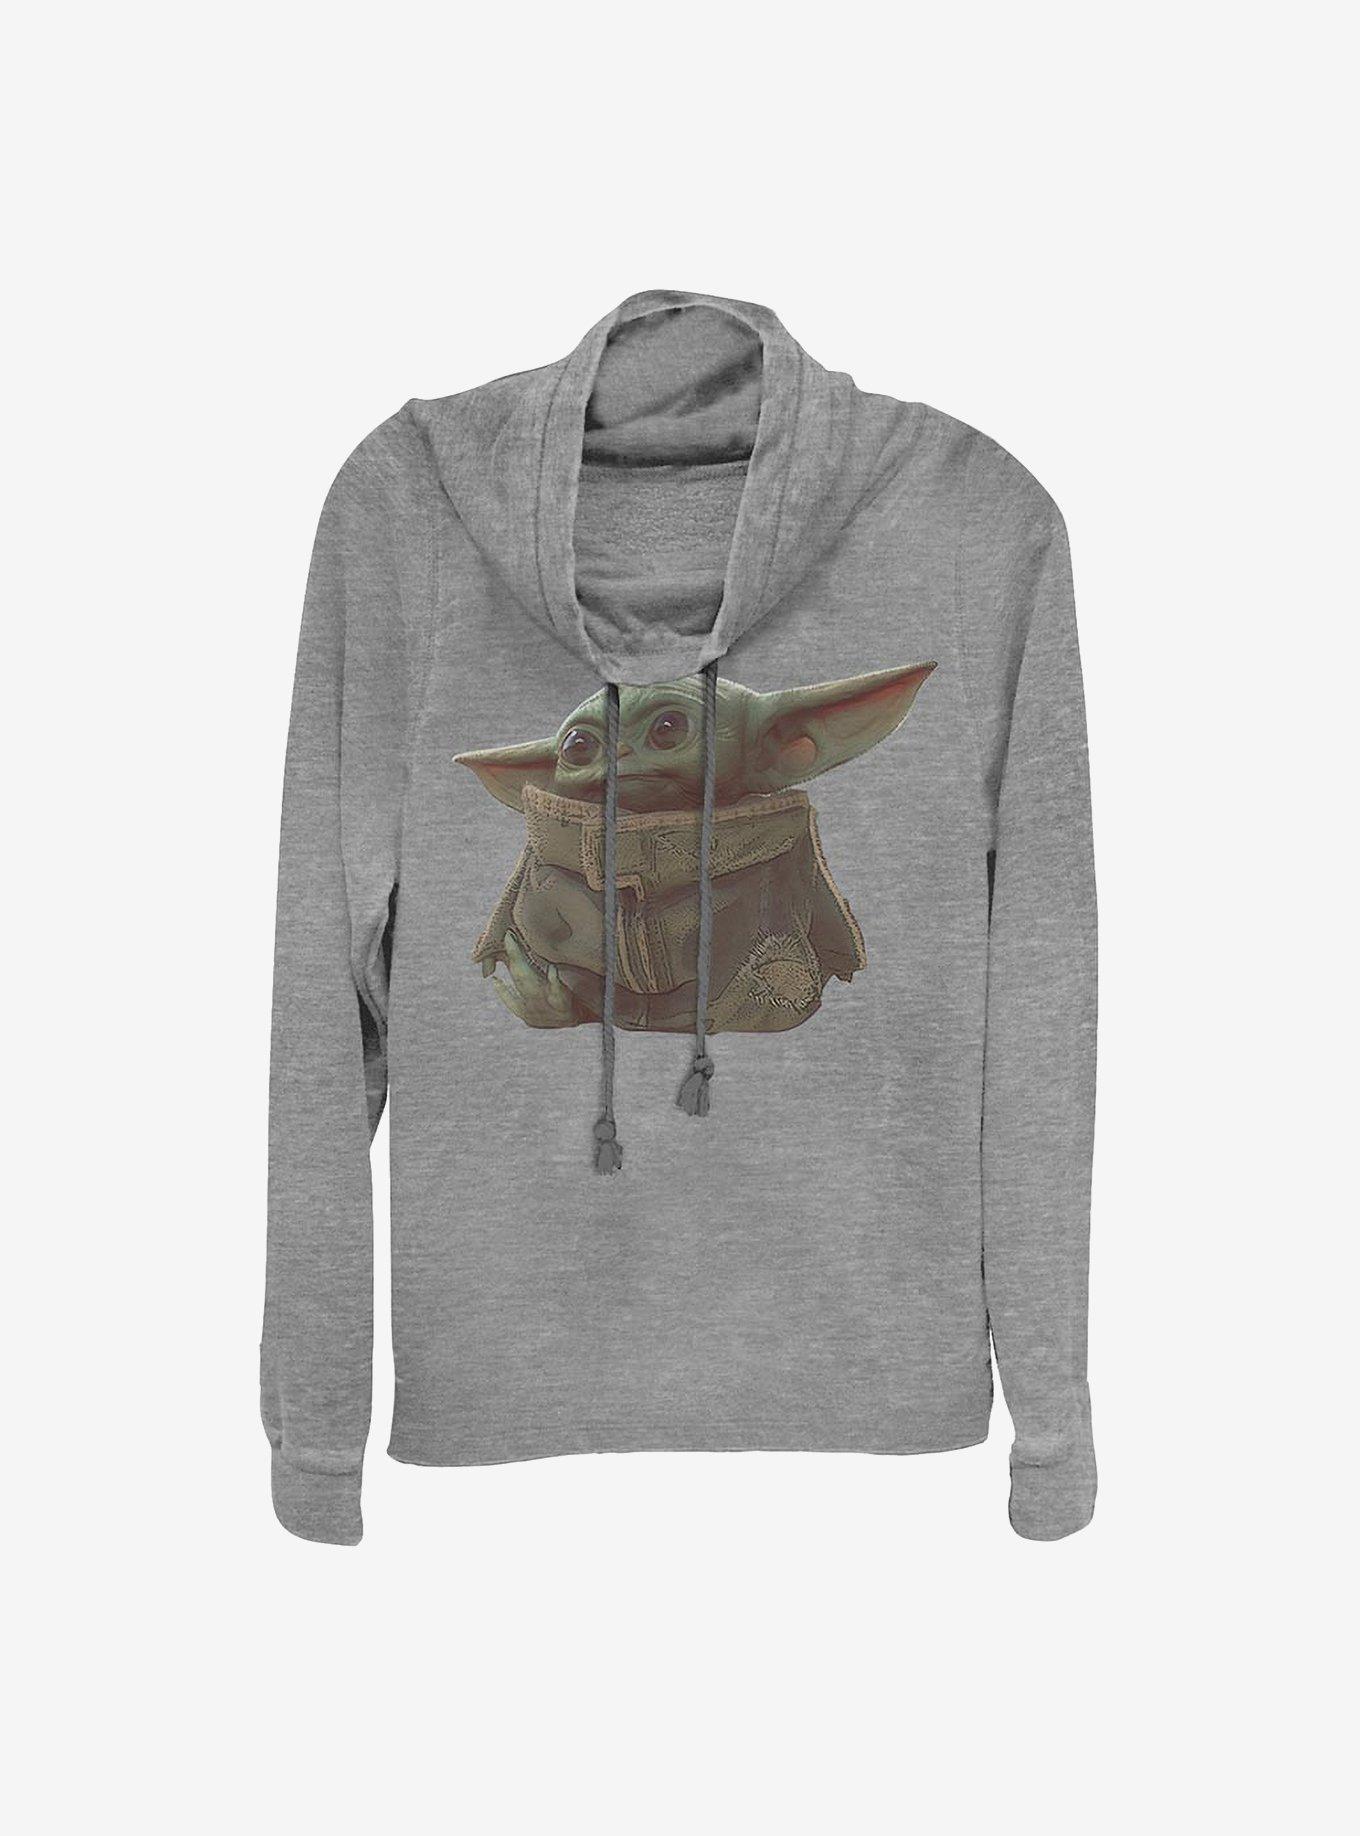 Star Wars The Mandalorian The Child Ball Theif Cowlneck Long-Sleeve Girls Top, GRAY HTR, hi-res